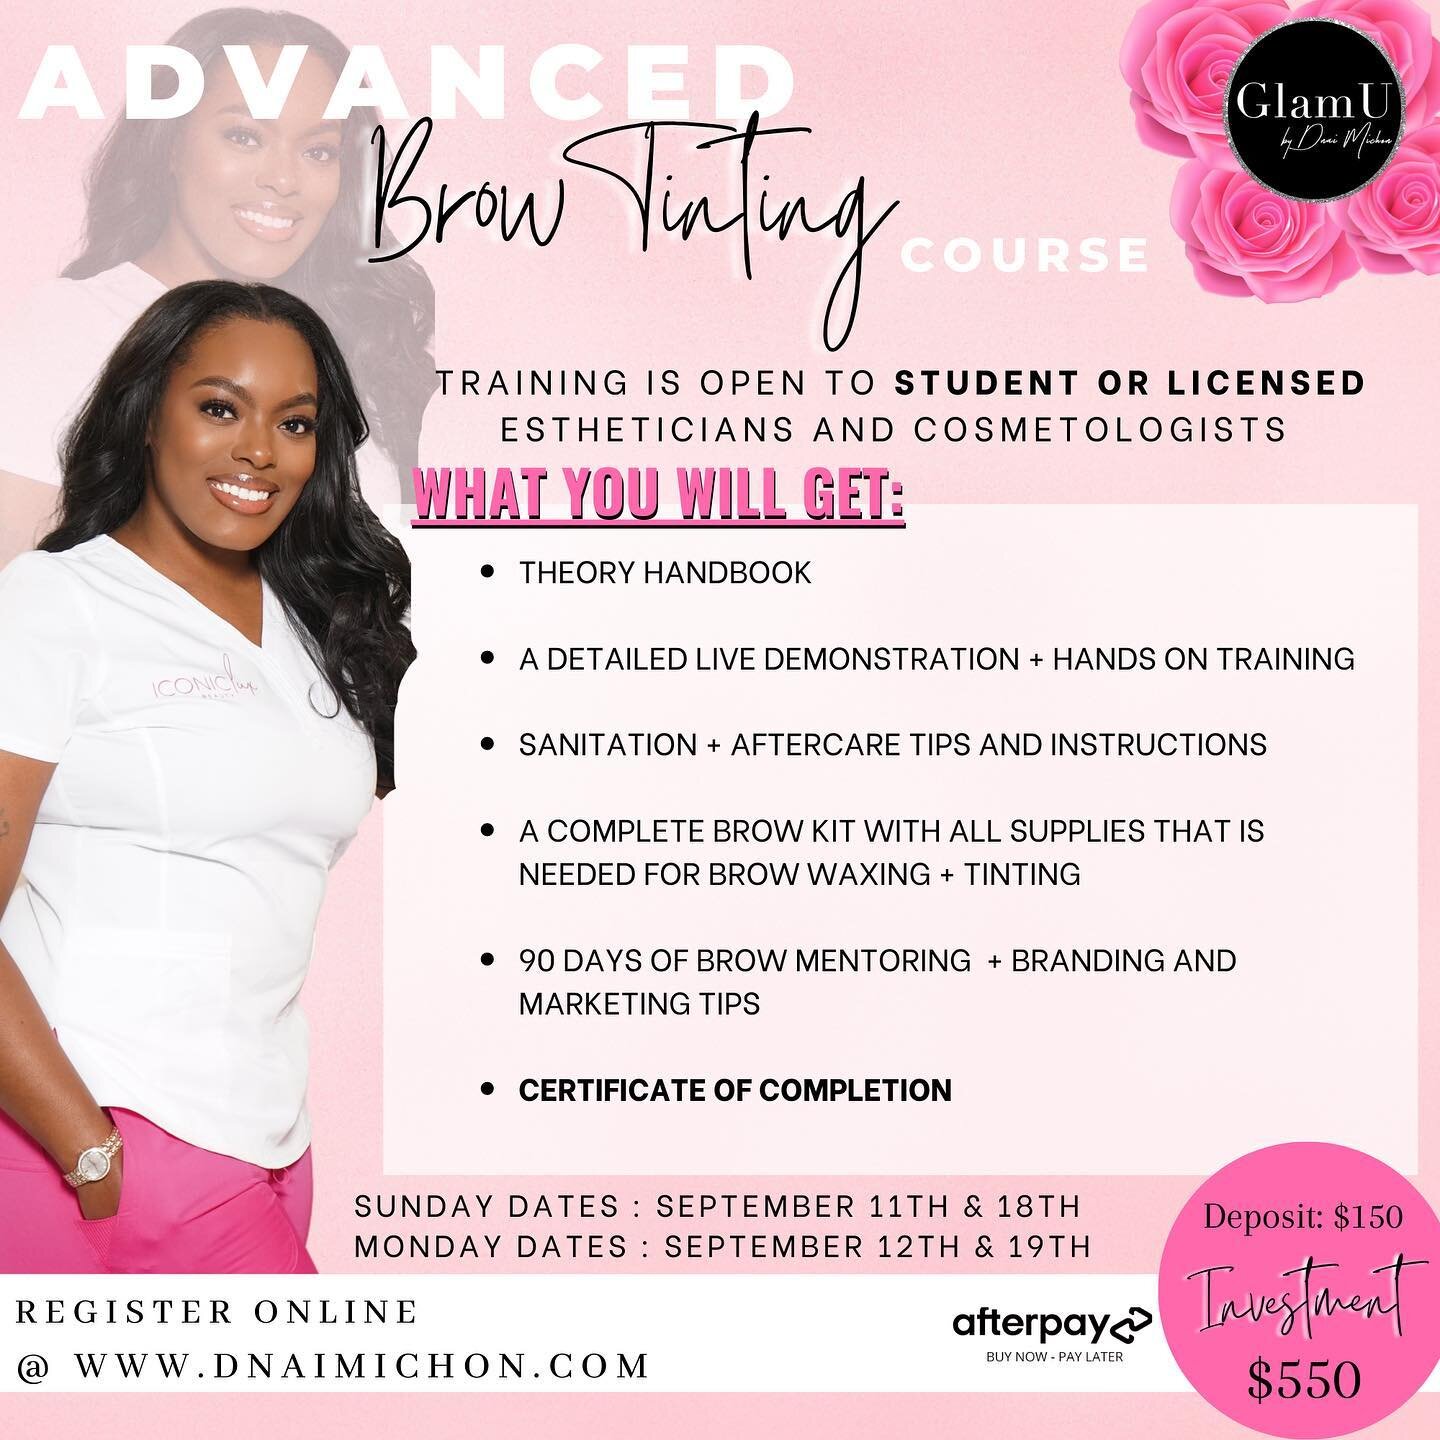 BEAUTY PROFESSIONALS 

Are you ready to grow your service menu? Are you looking to add something new to your skills list? 

Have you trained before but want to learn a new technique ? 

Brow Tinting has become a popular beauty service over the years!